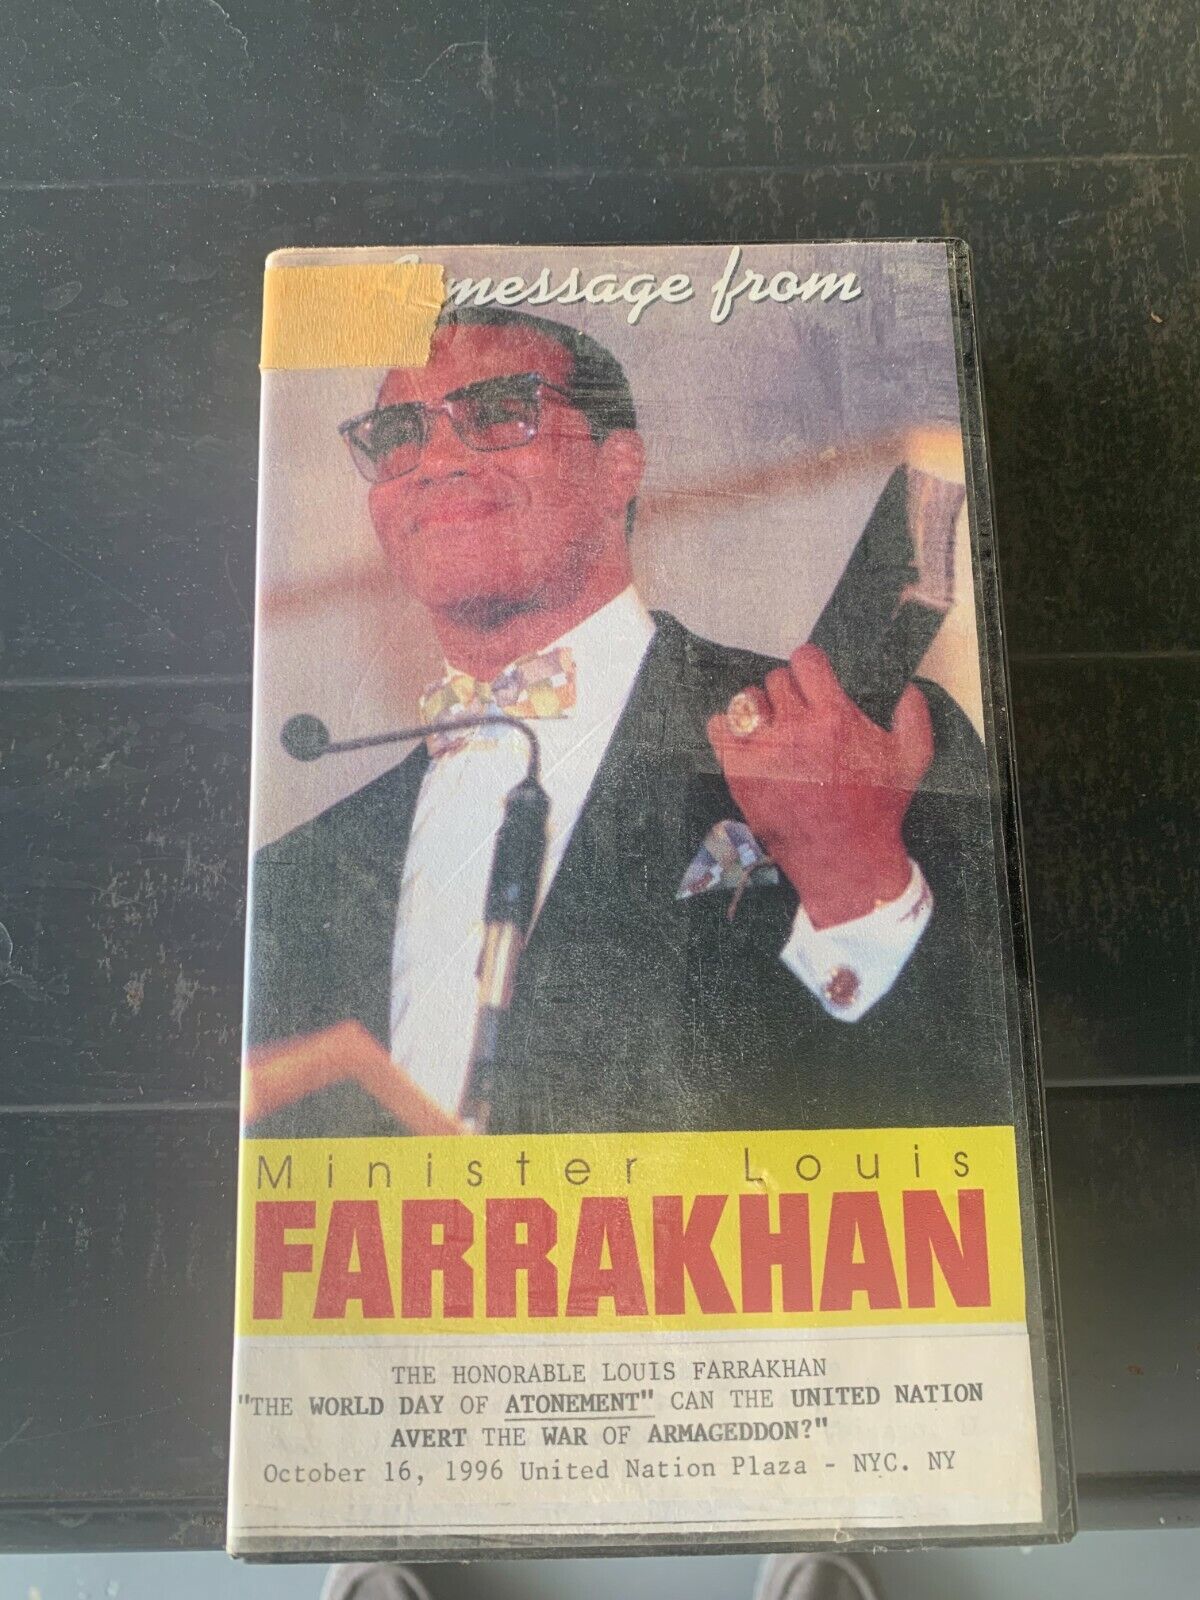 1996 A Message from Minister Louis Farrakhan VHS Tape from United Nations Plaza